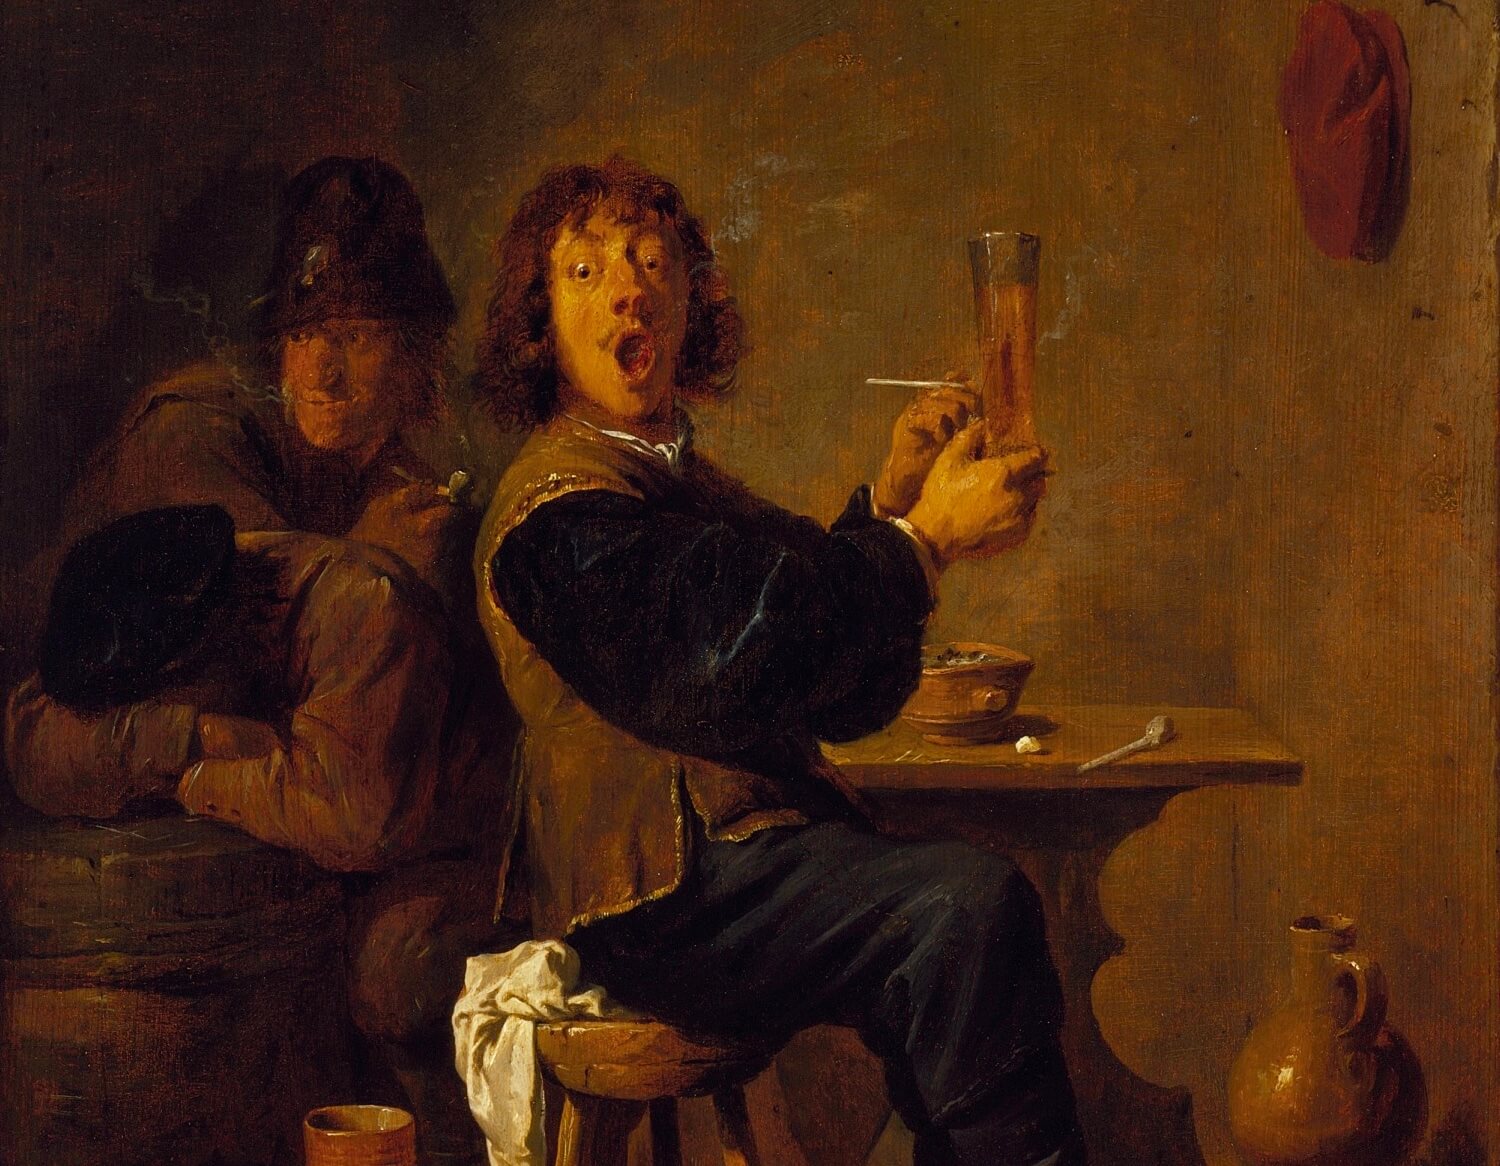 20 paintings from the Golden Age of stoner art